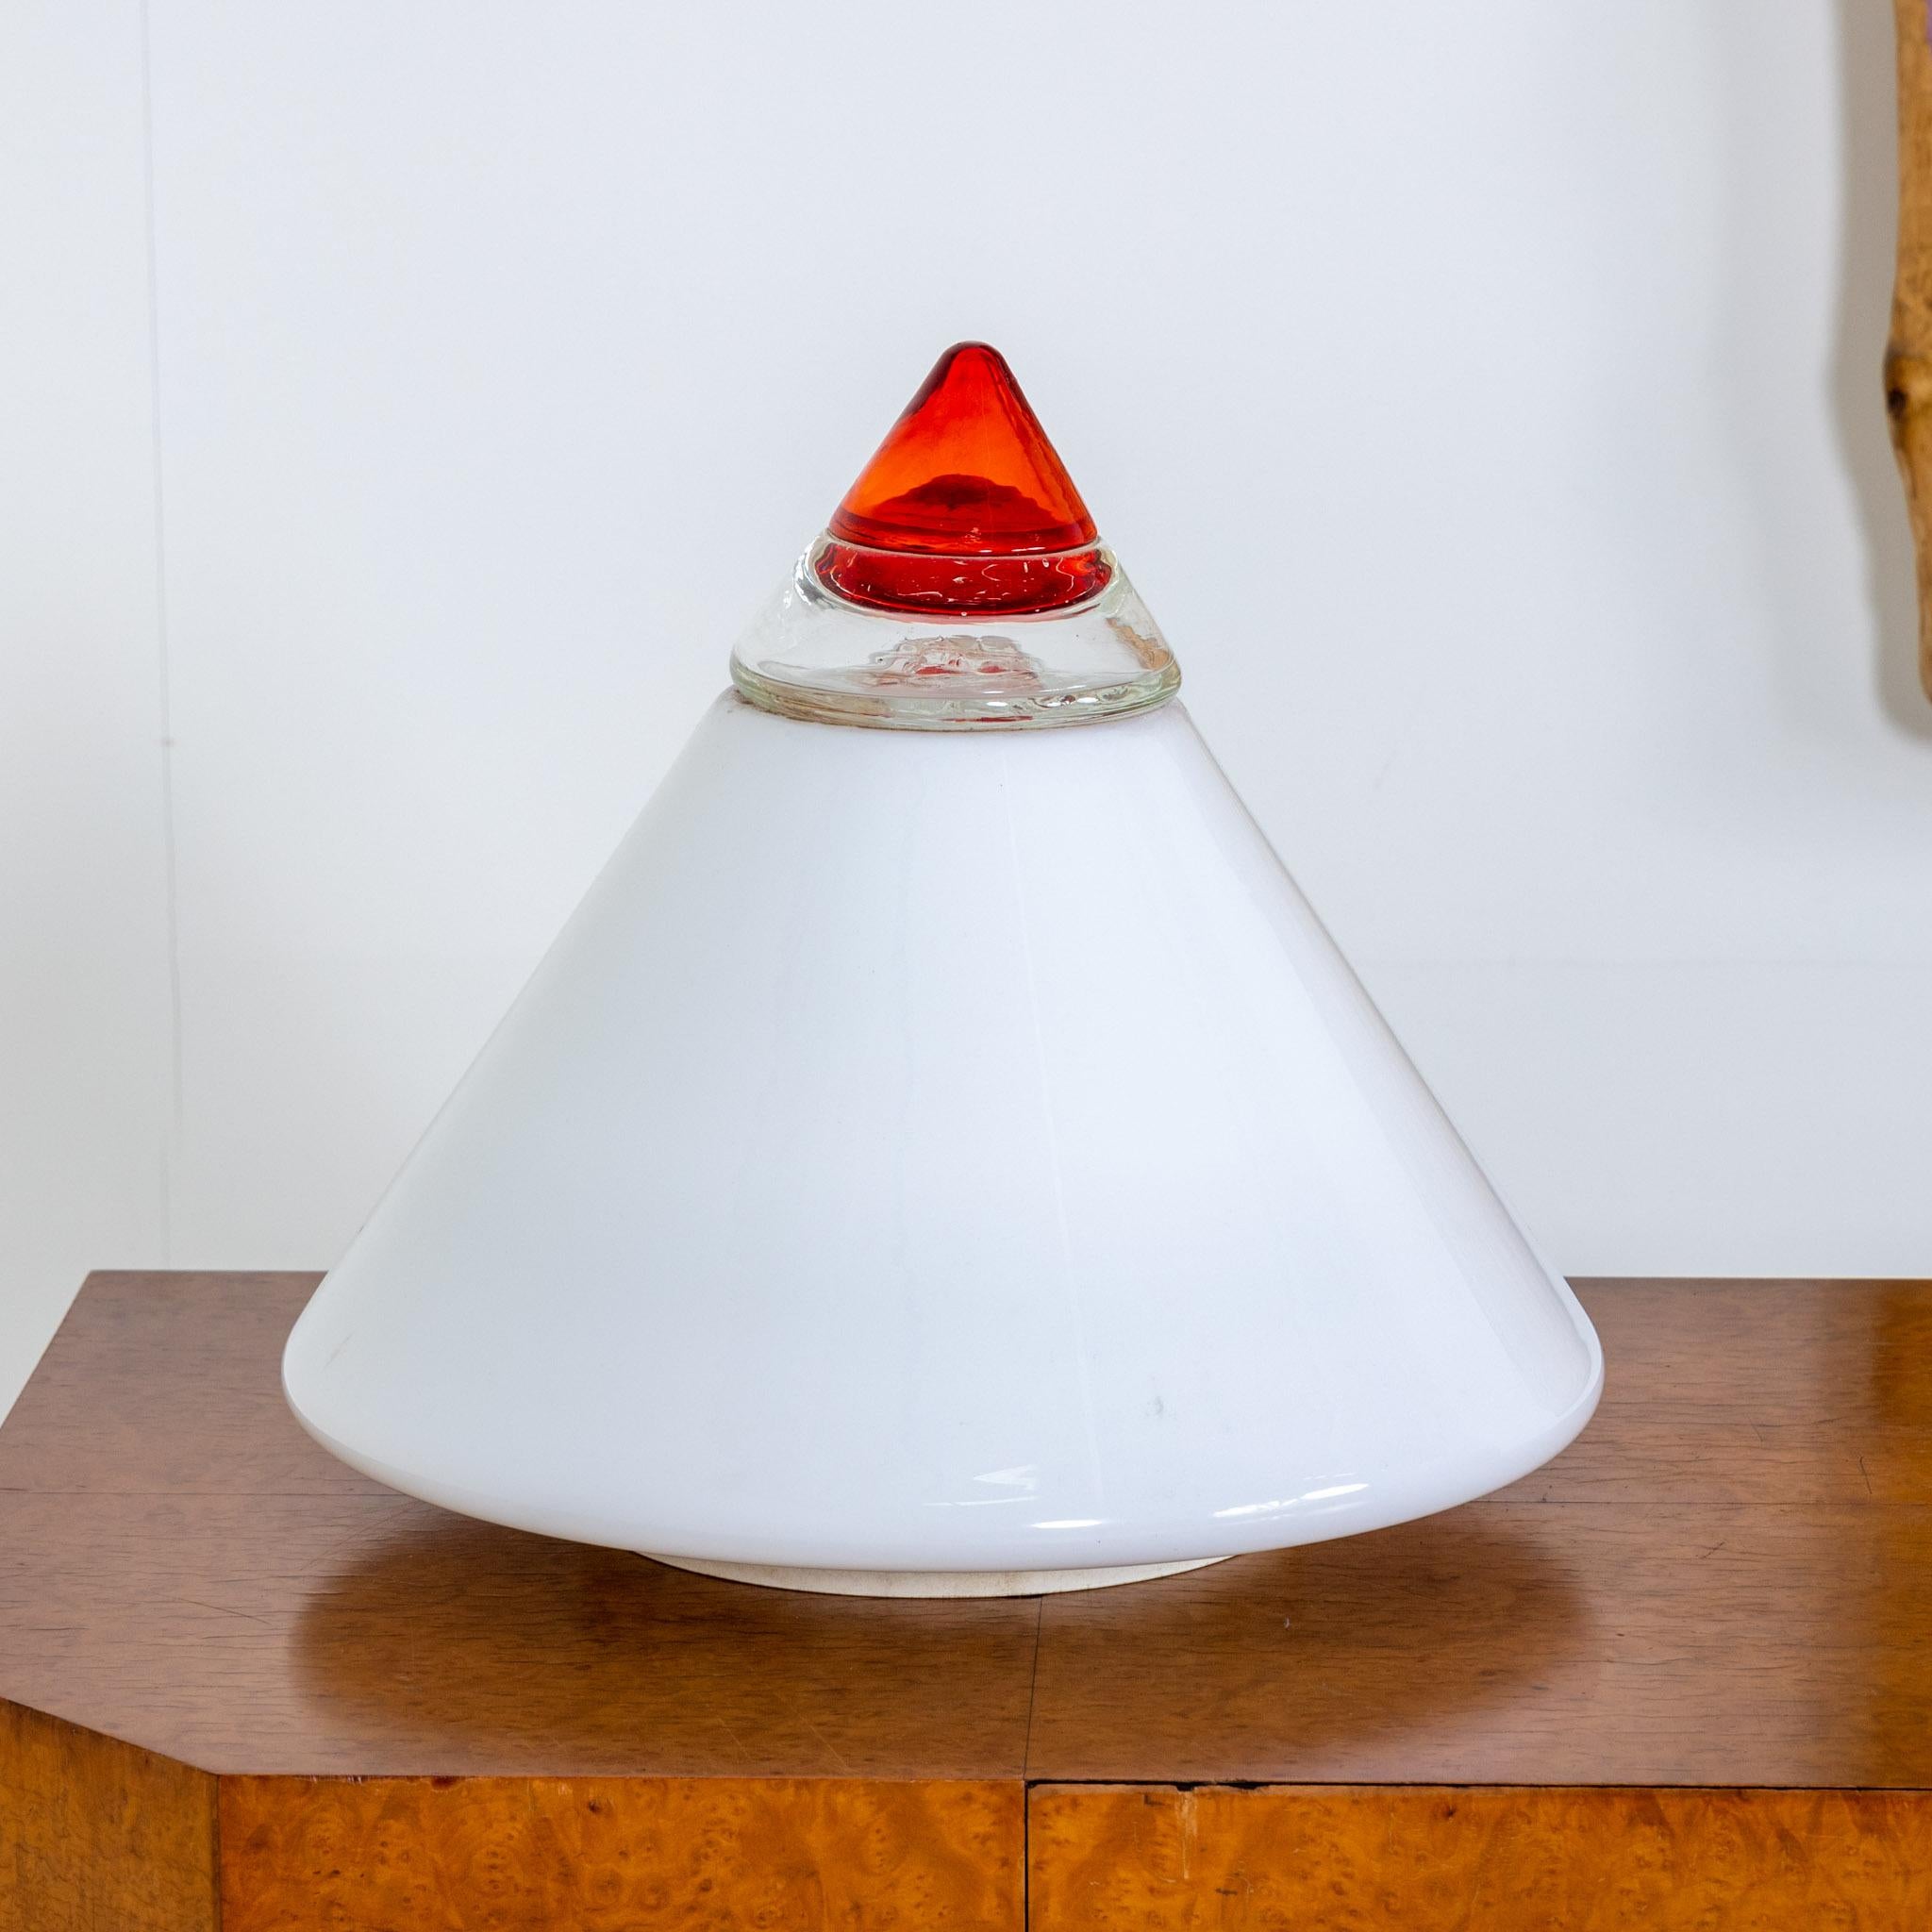 Cone-shaped table lamp made of white glass and red lace. Label on the side 